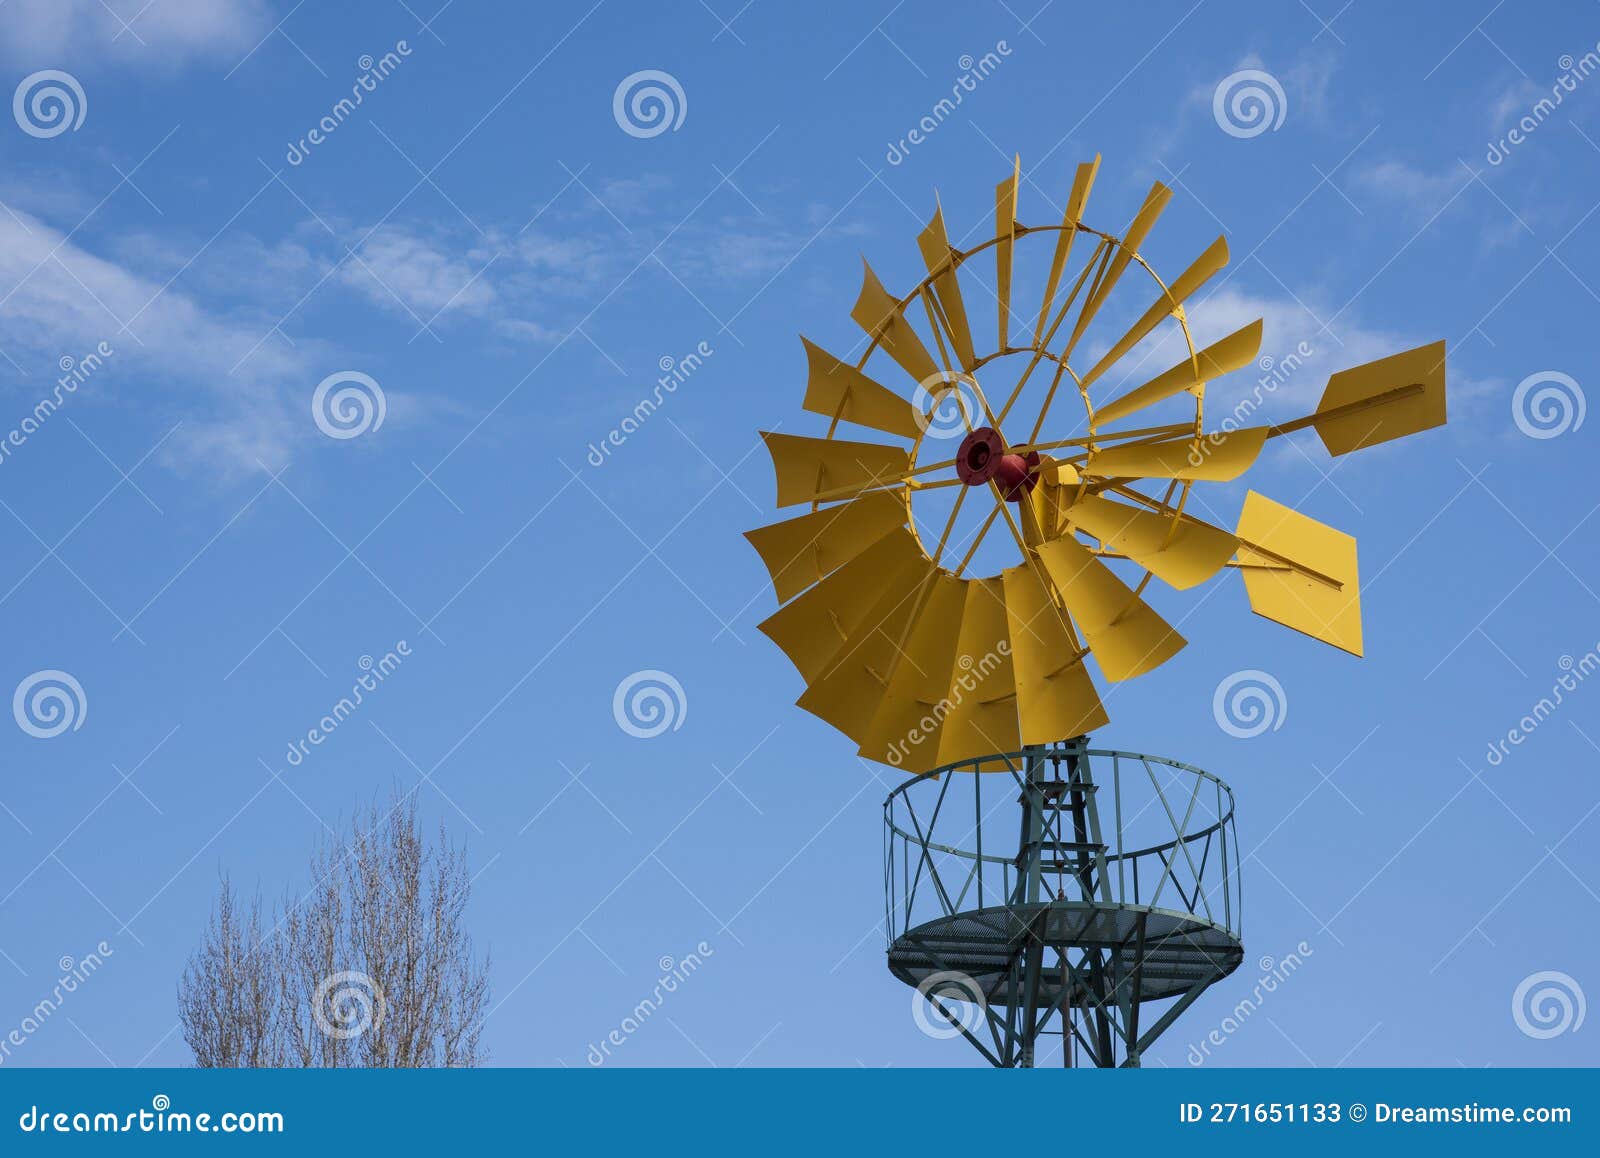 wind turbine, with the yellow blades producing energy